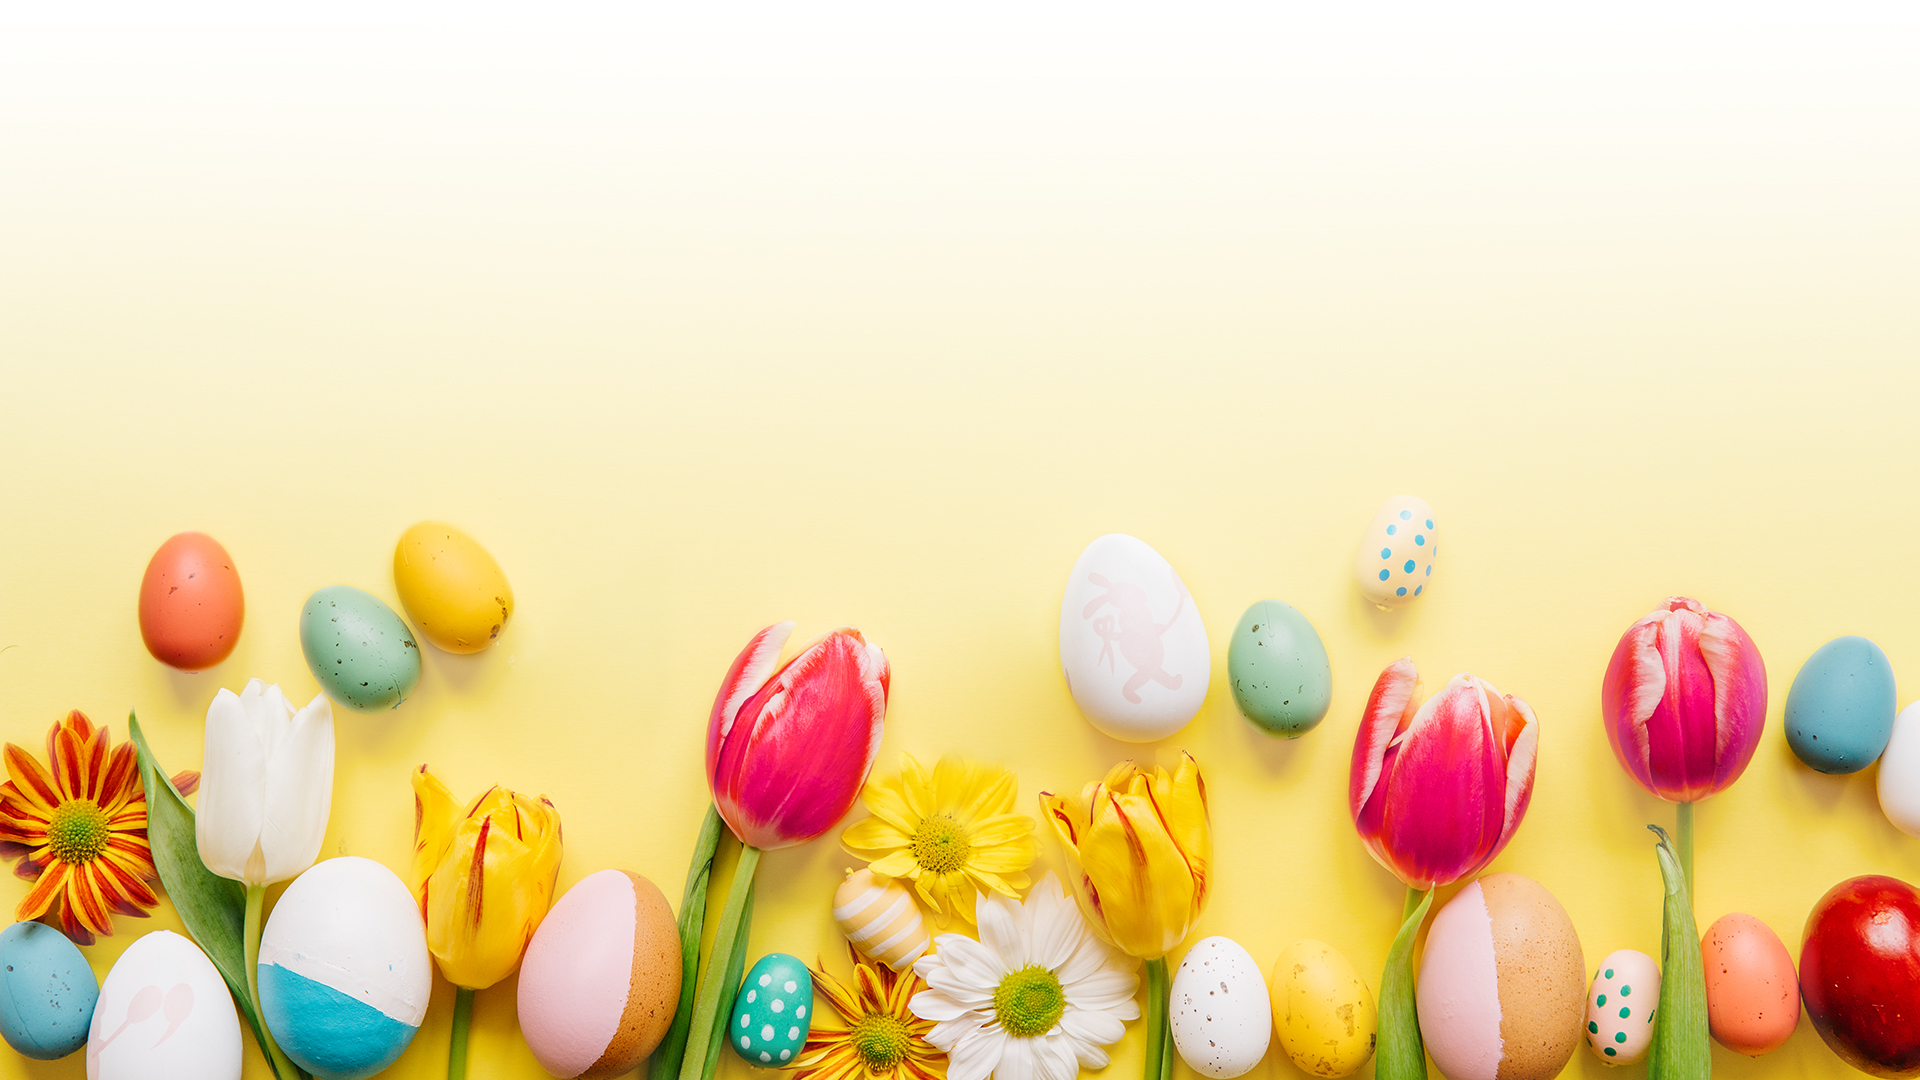 10 ideas for a family-focused Easter